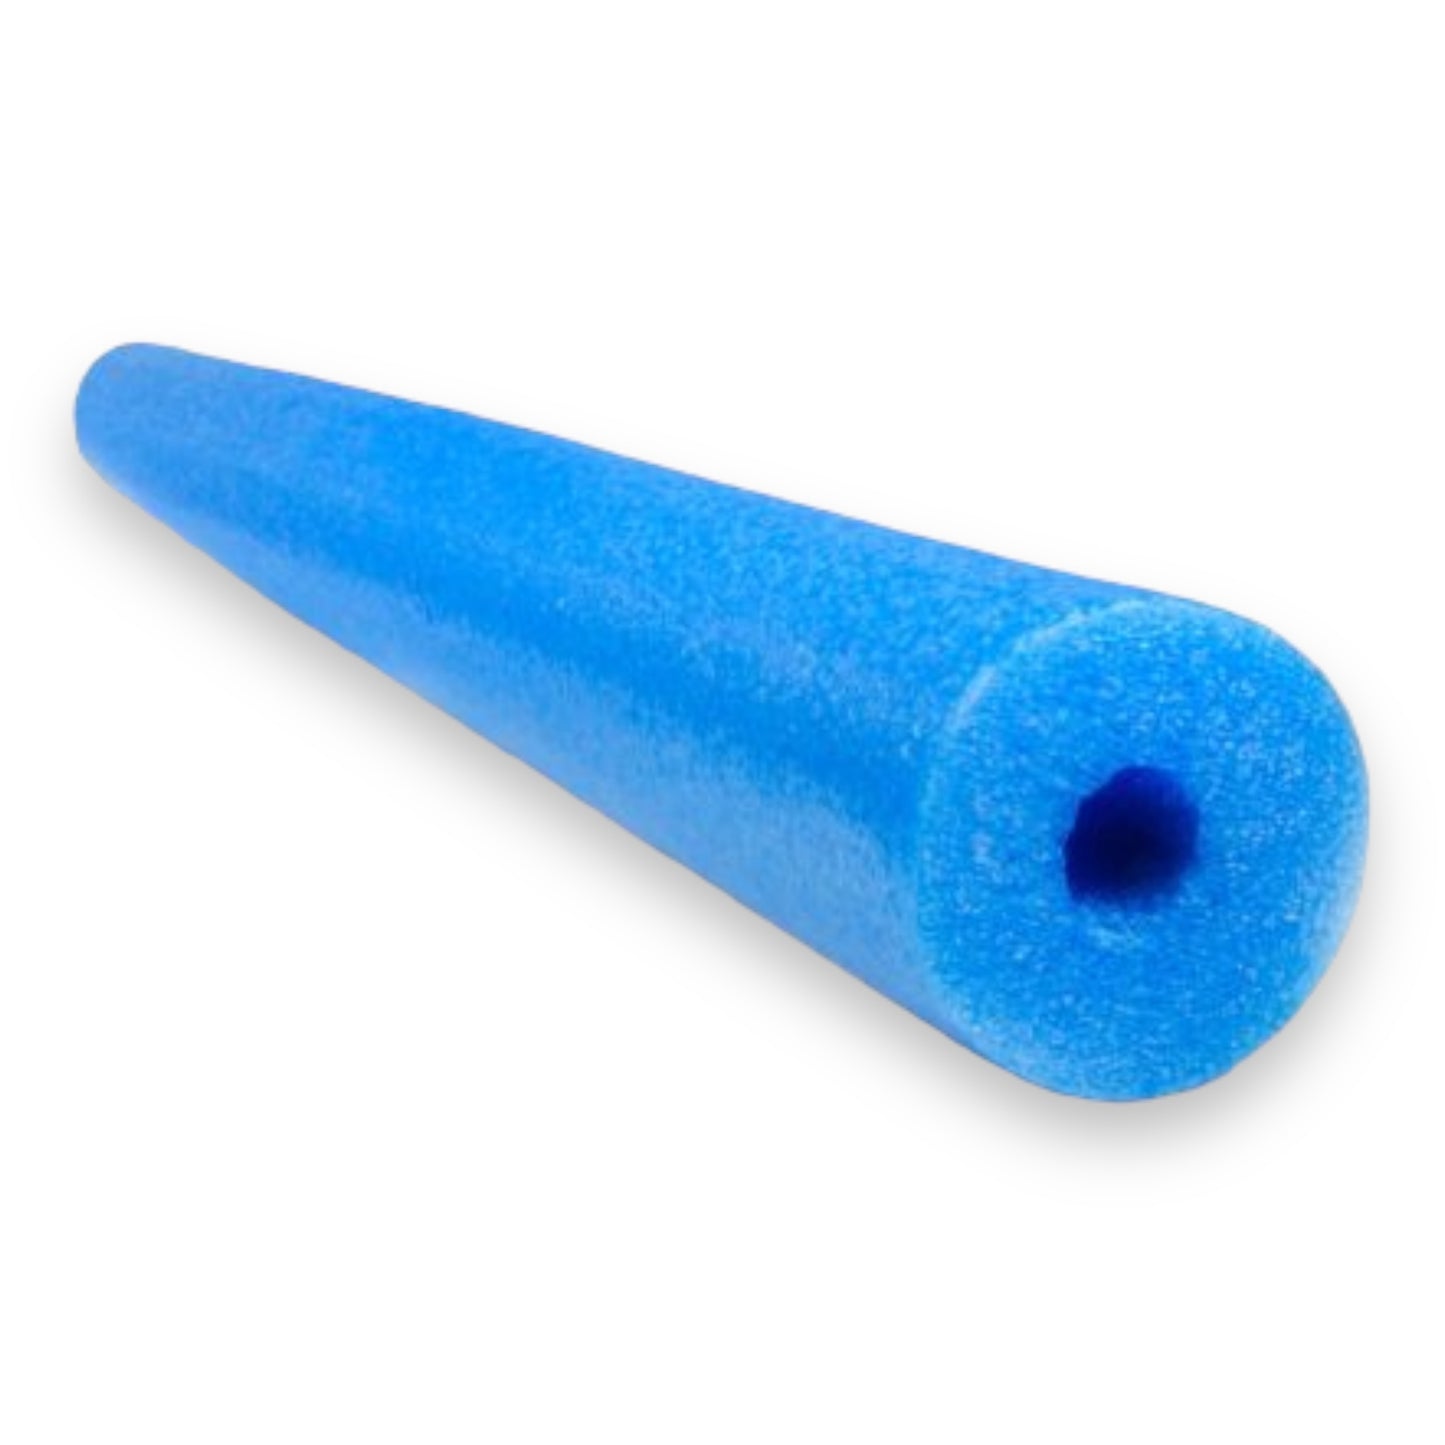 Timmy Toys - ED048 - Pool Swimming Noodle - 155cm - 4 Colours